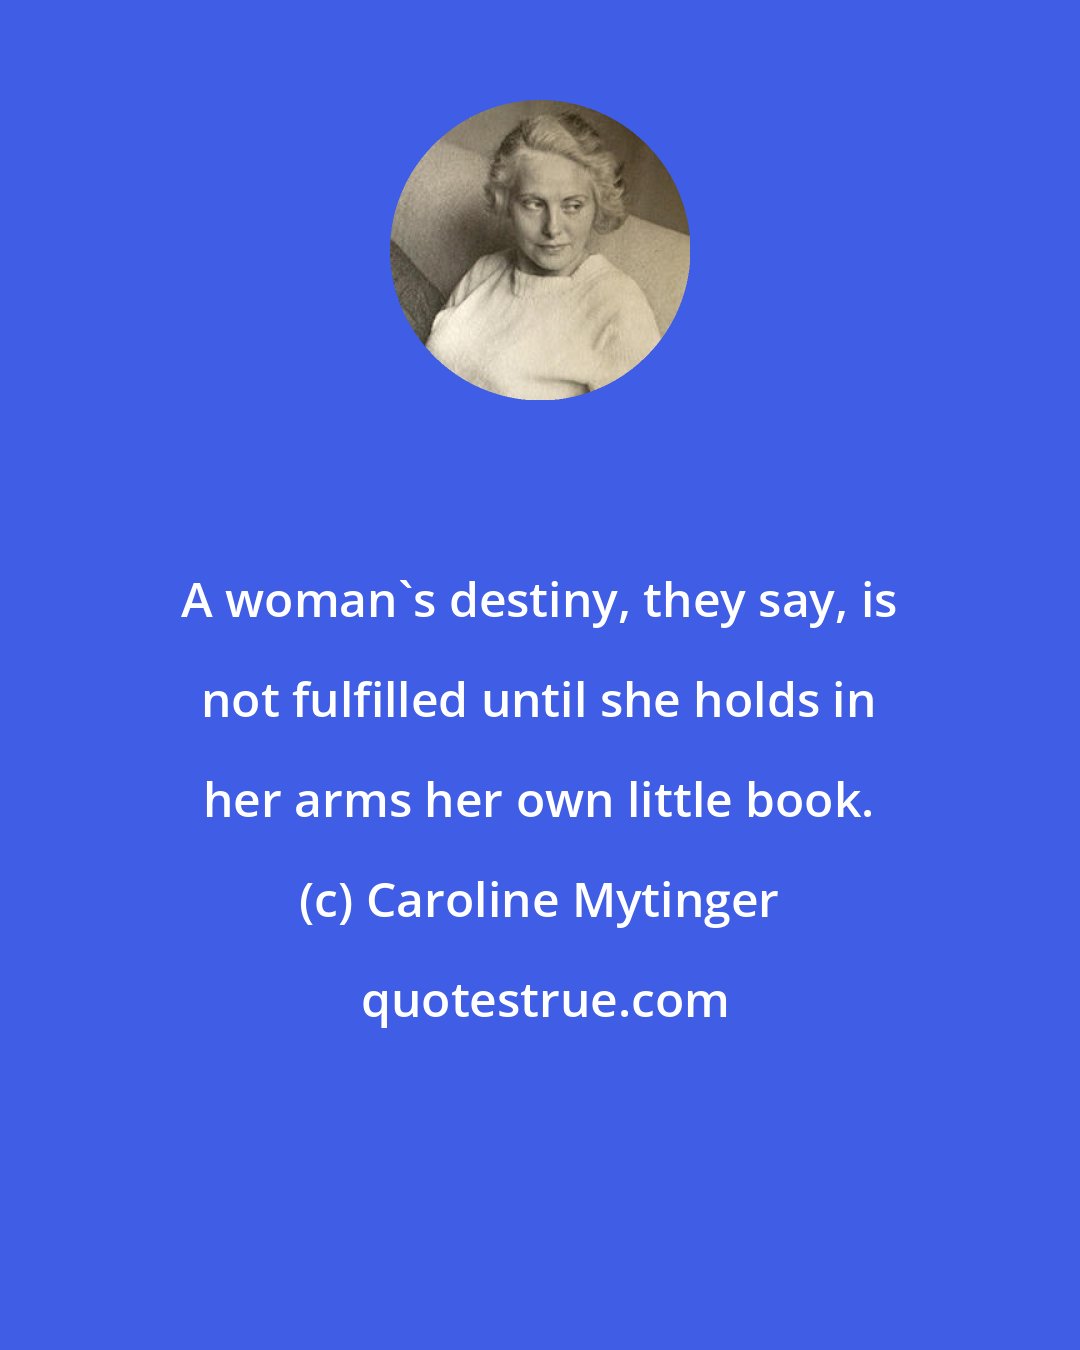 Caroline Mytinger: A woman's destiny, they say, is not fulfilled until she holds in her arms her own little book.